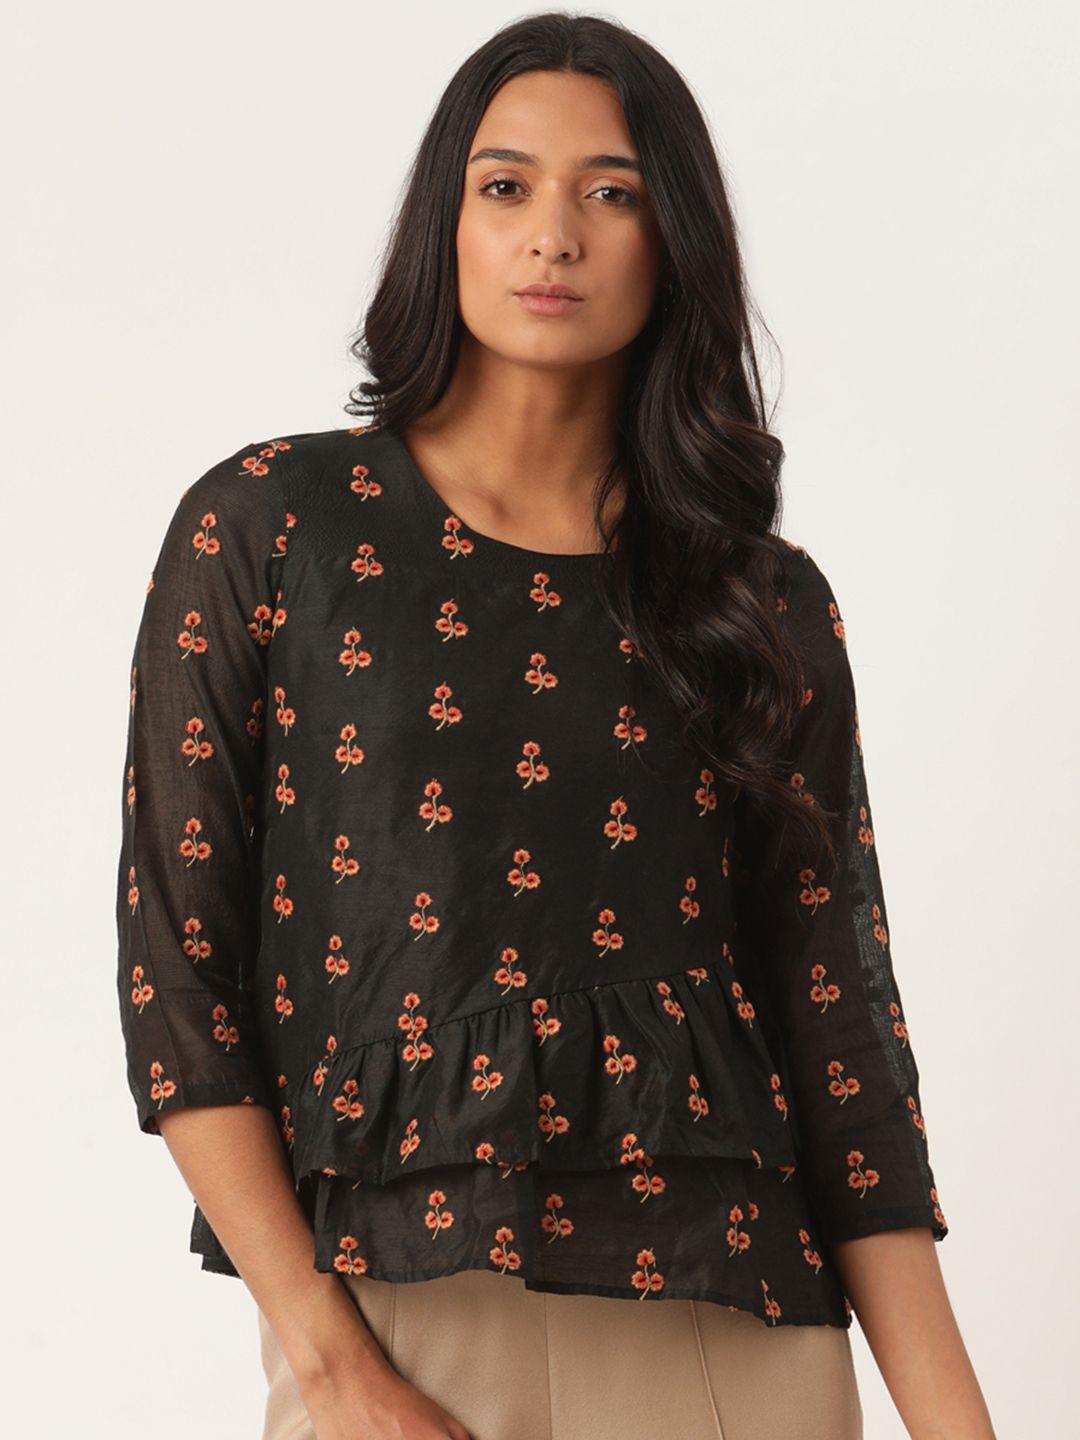 rooted women black floral printed top